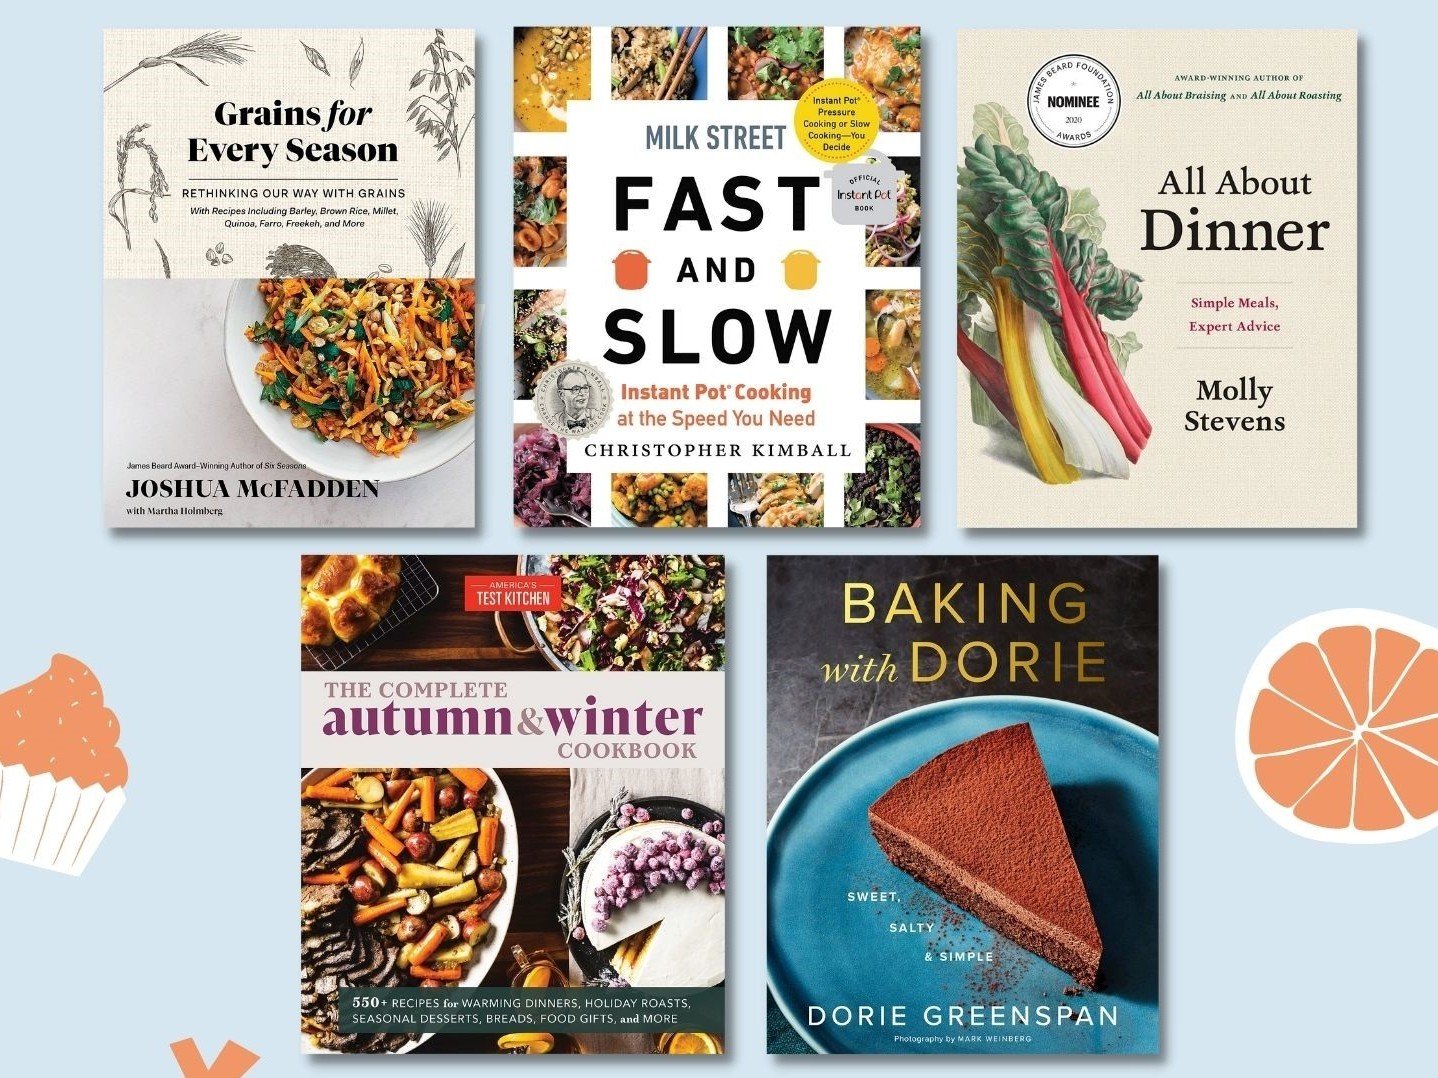 These 5 cookbooks help keep Thanksgiving simple — and focused on family